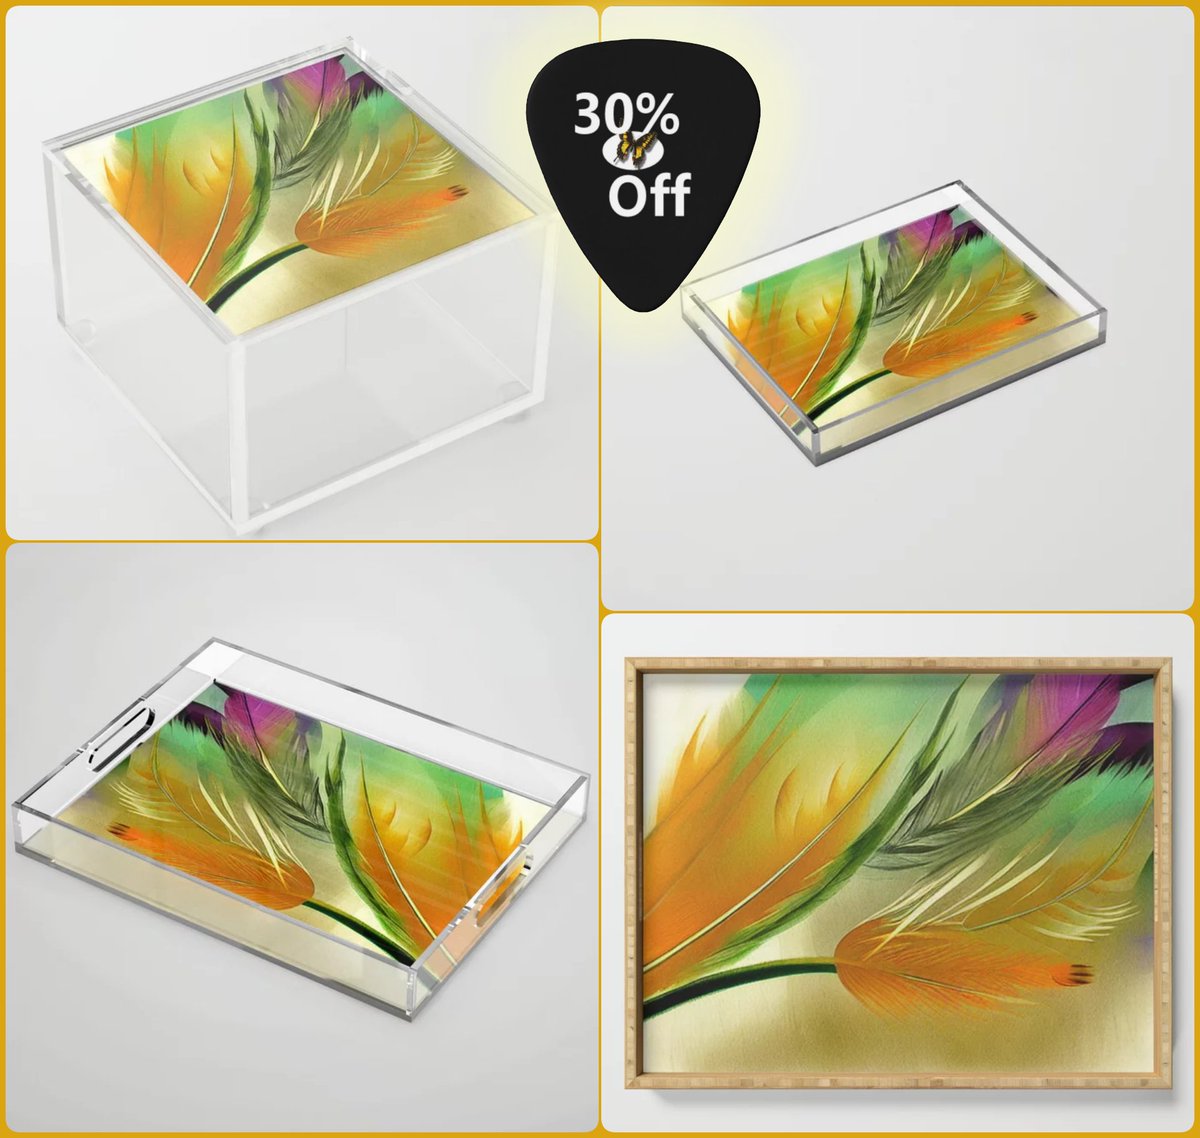 *SALE 30% Off*
Wilderness Waves Acrylic Tray & Boxes~by Art_Falaxy
~Art Exquisite!~ #coasters #gifts #trays #mugs #coffee #society6 #travel #artfalaxy #art #accents #modern #trendy #wine #water #placemats #tablecloths #runners

society6.com/product/wilder…